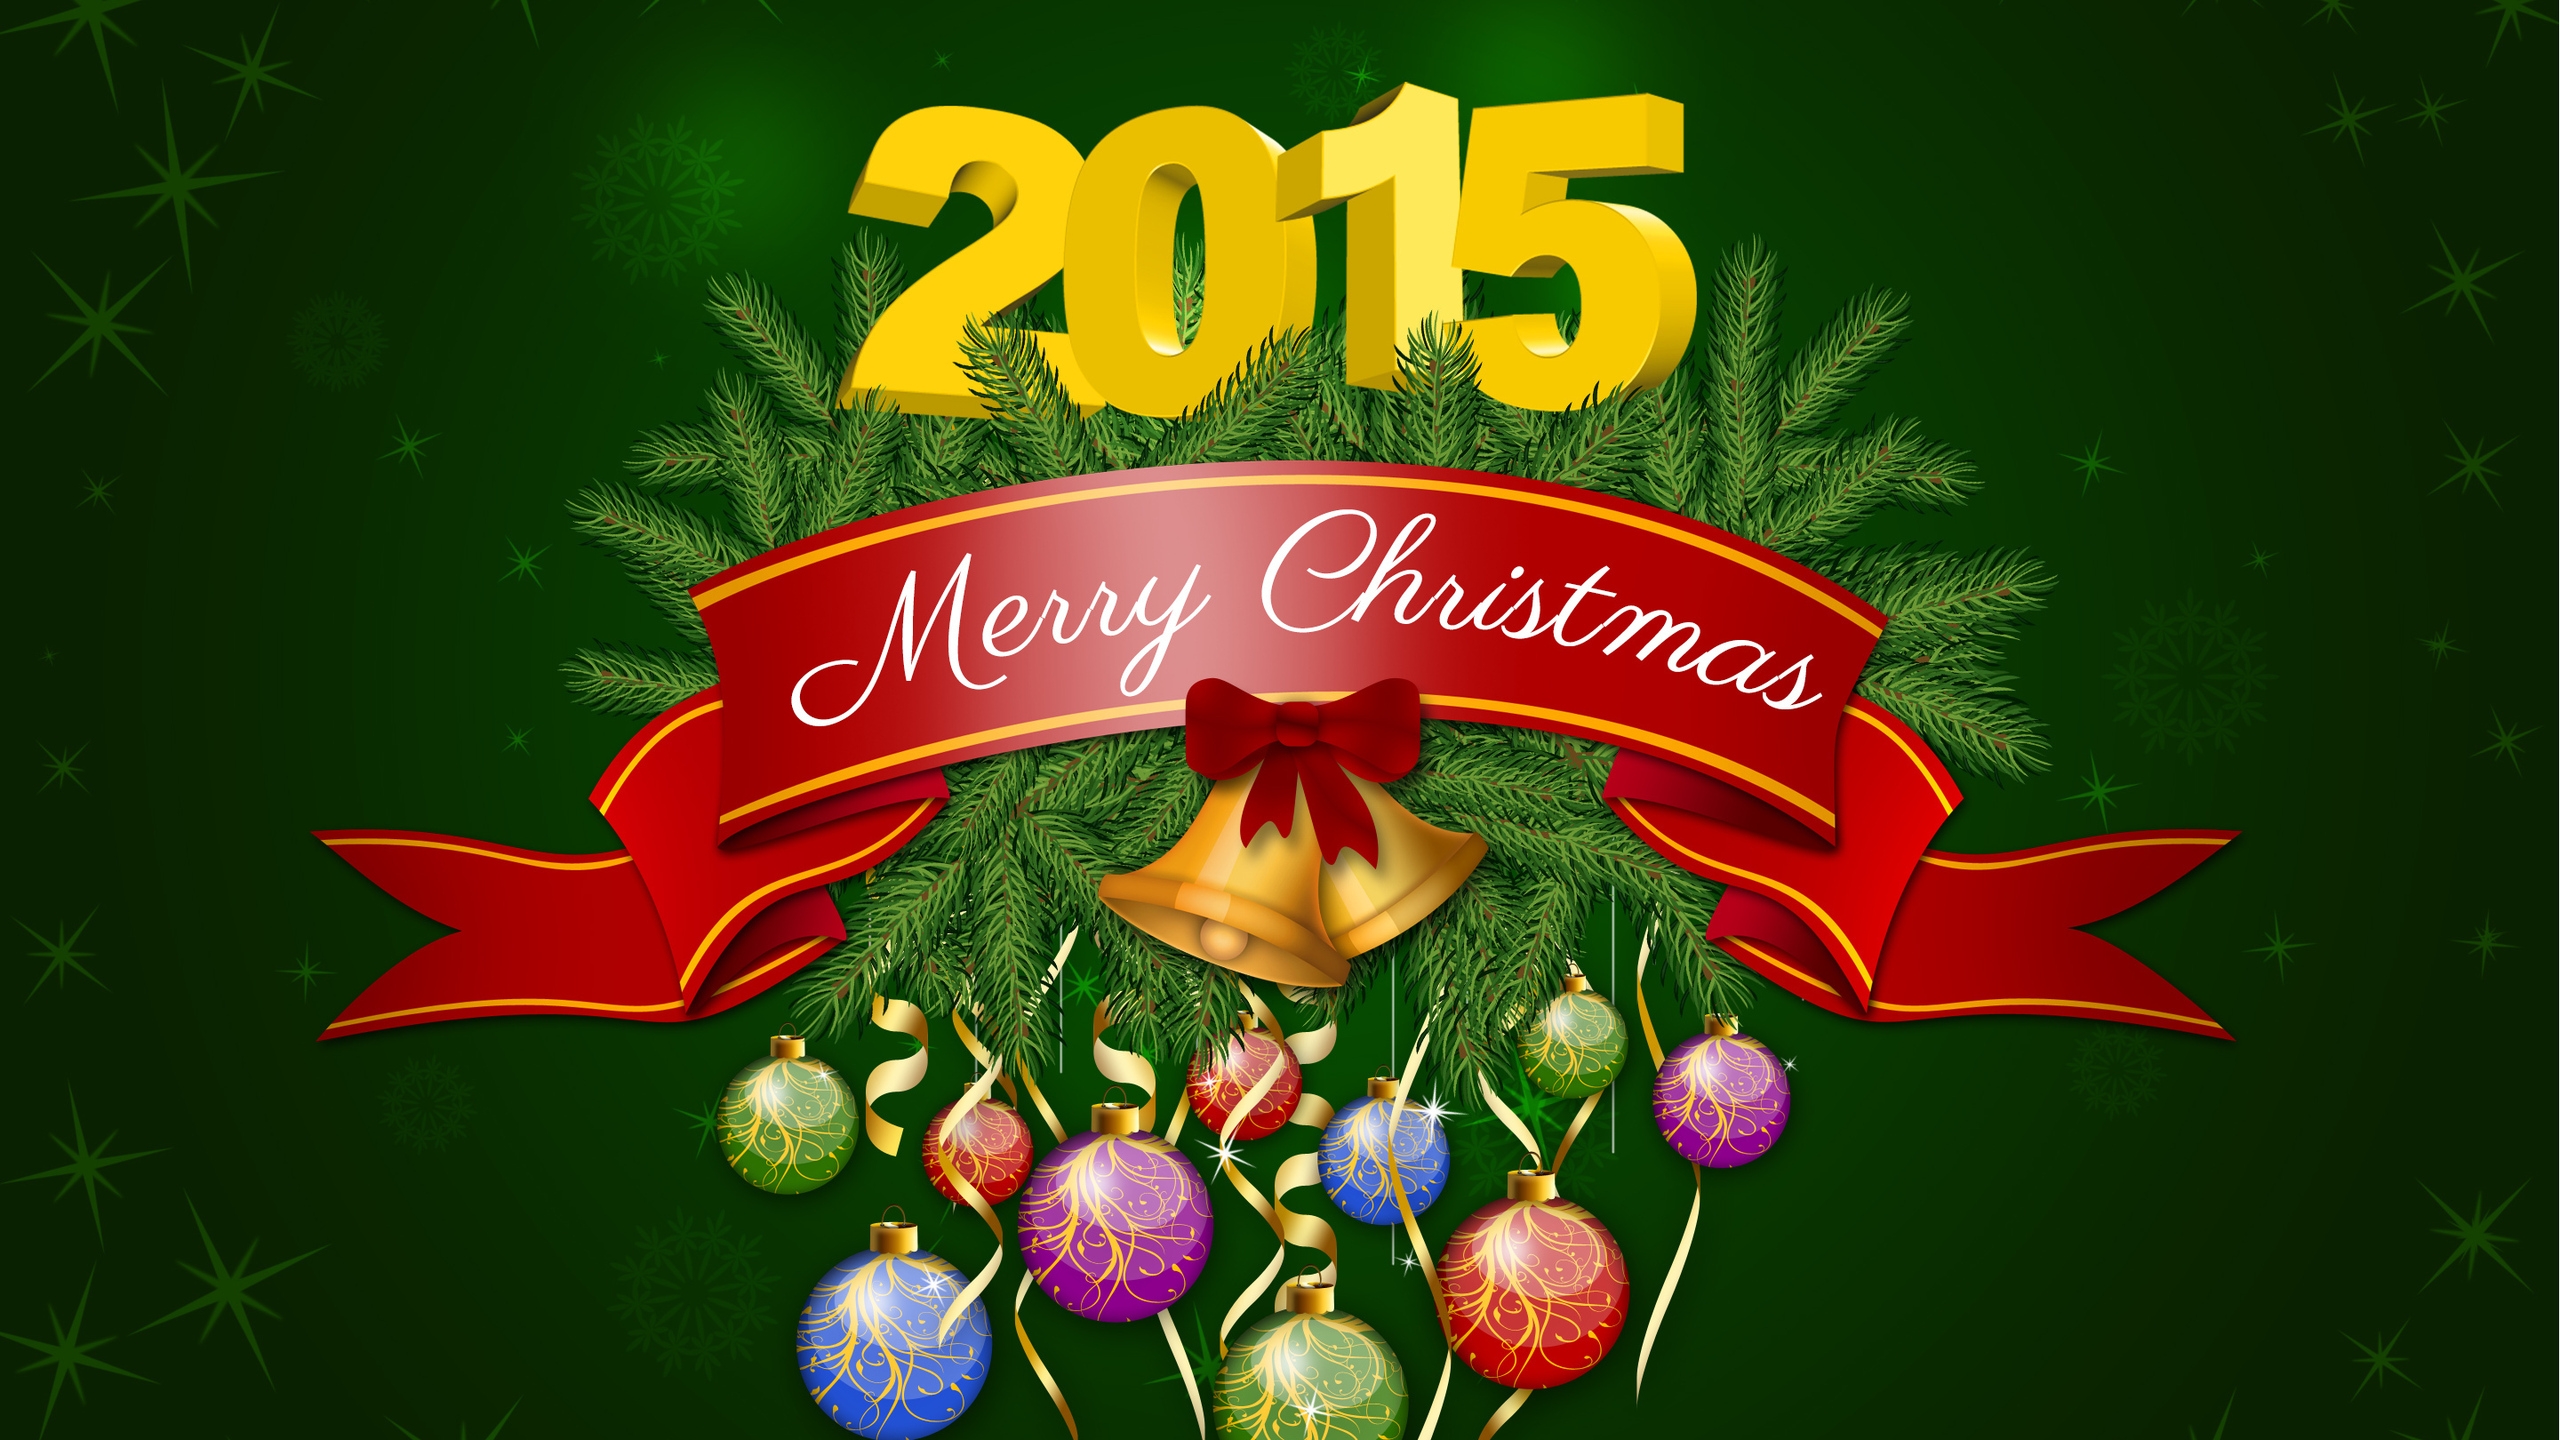 2014 Merry Christmas Poster for 2560x1440 HDTV resolution